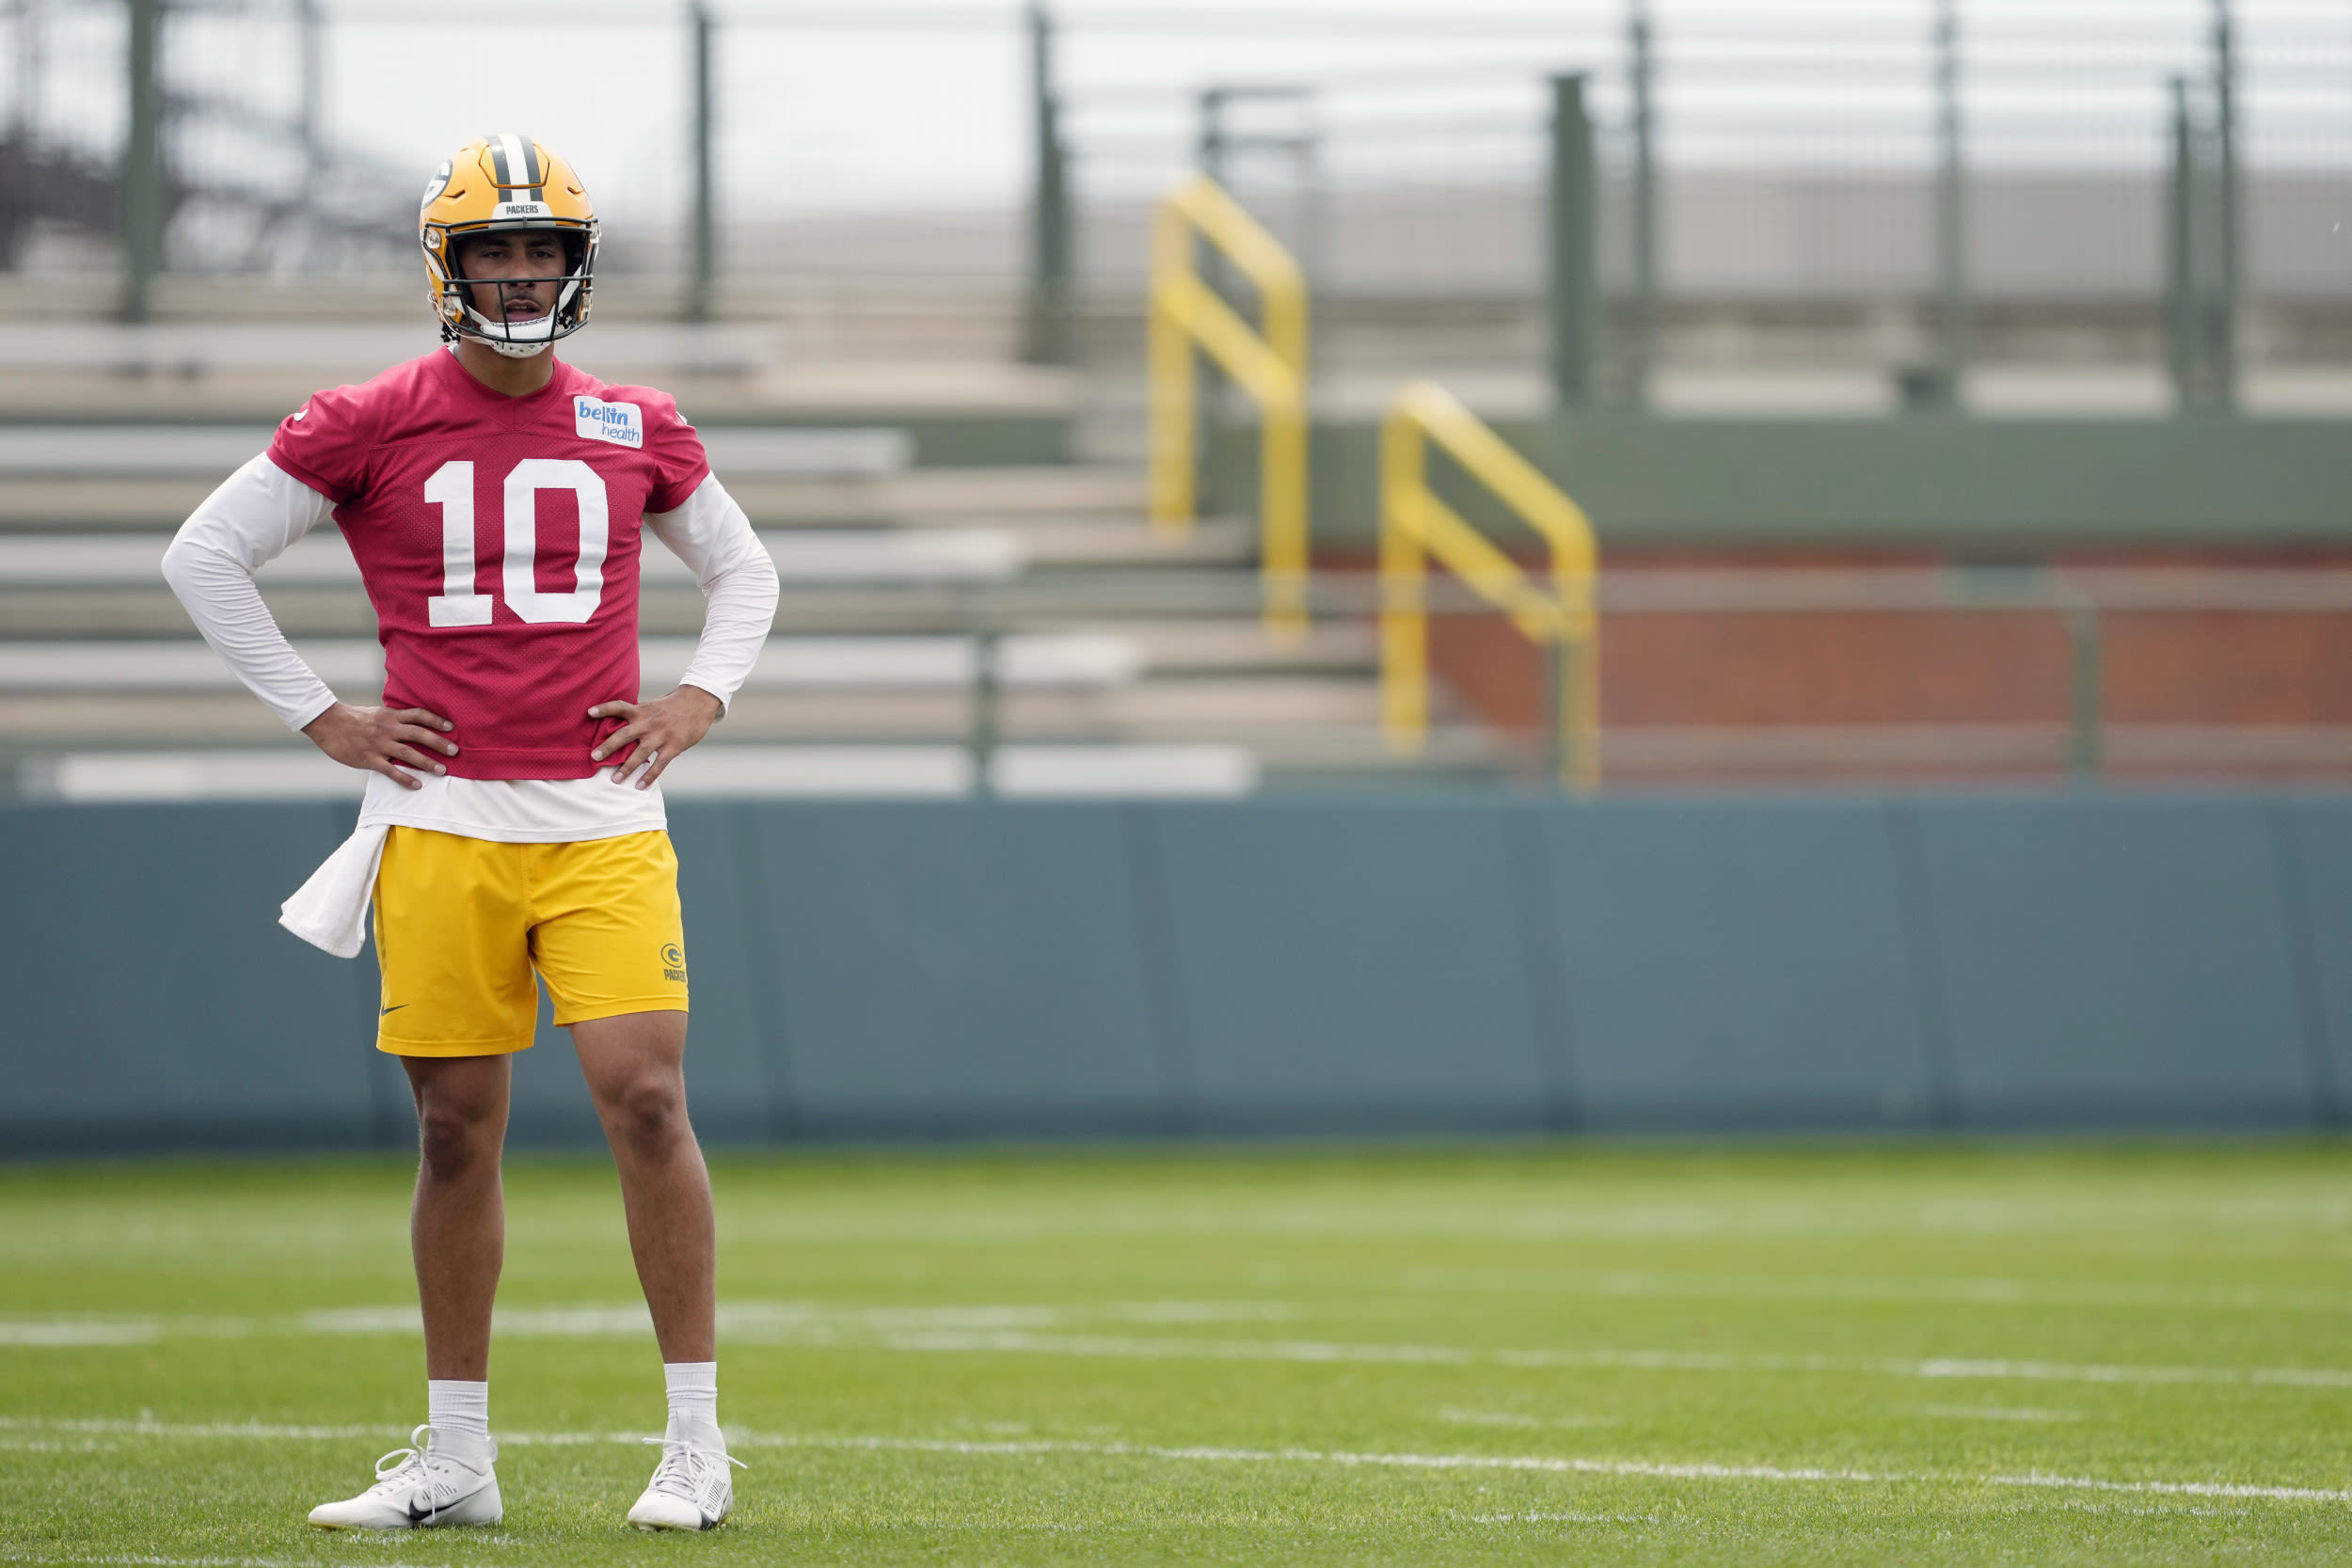 Packers Quarterback Jordan Love Refuses to Practice Without New Deal